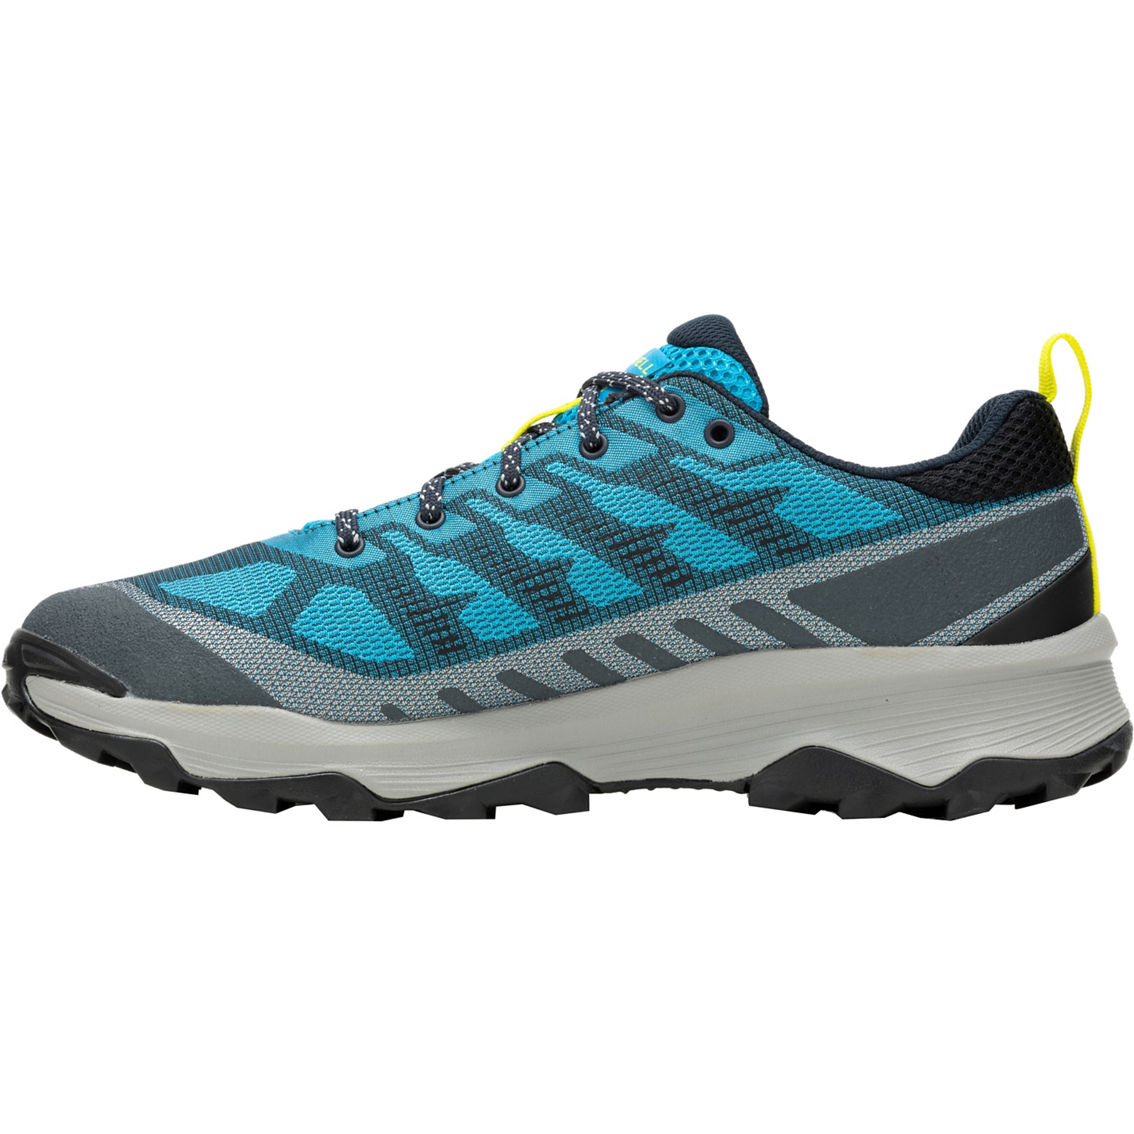 Merrell Men's Speed Eco Tahoe Hiking Shoes | Men's Athletic Shoes ...